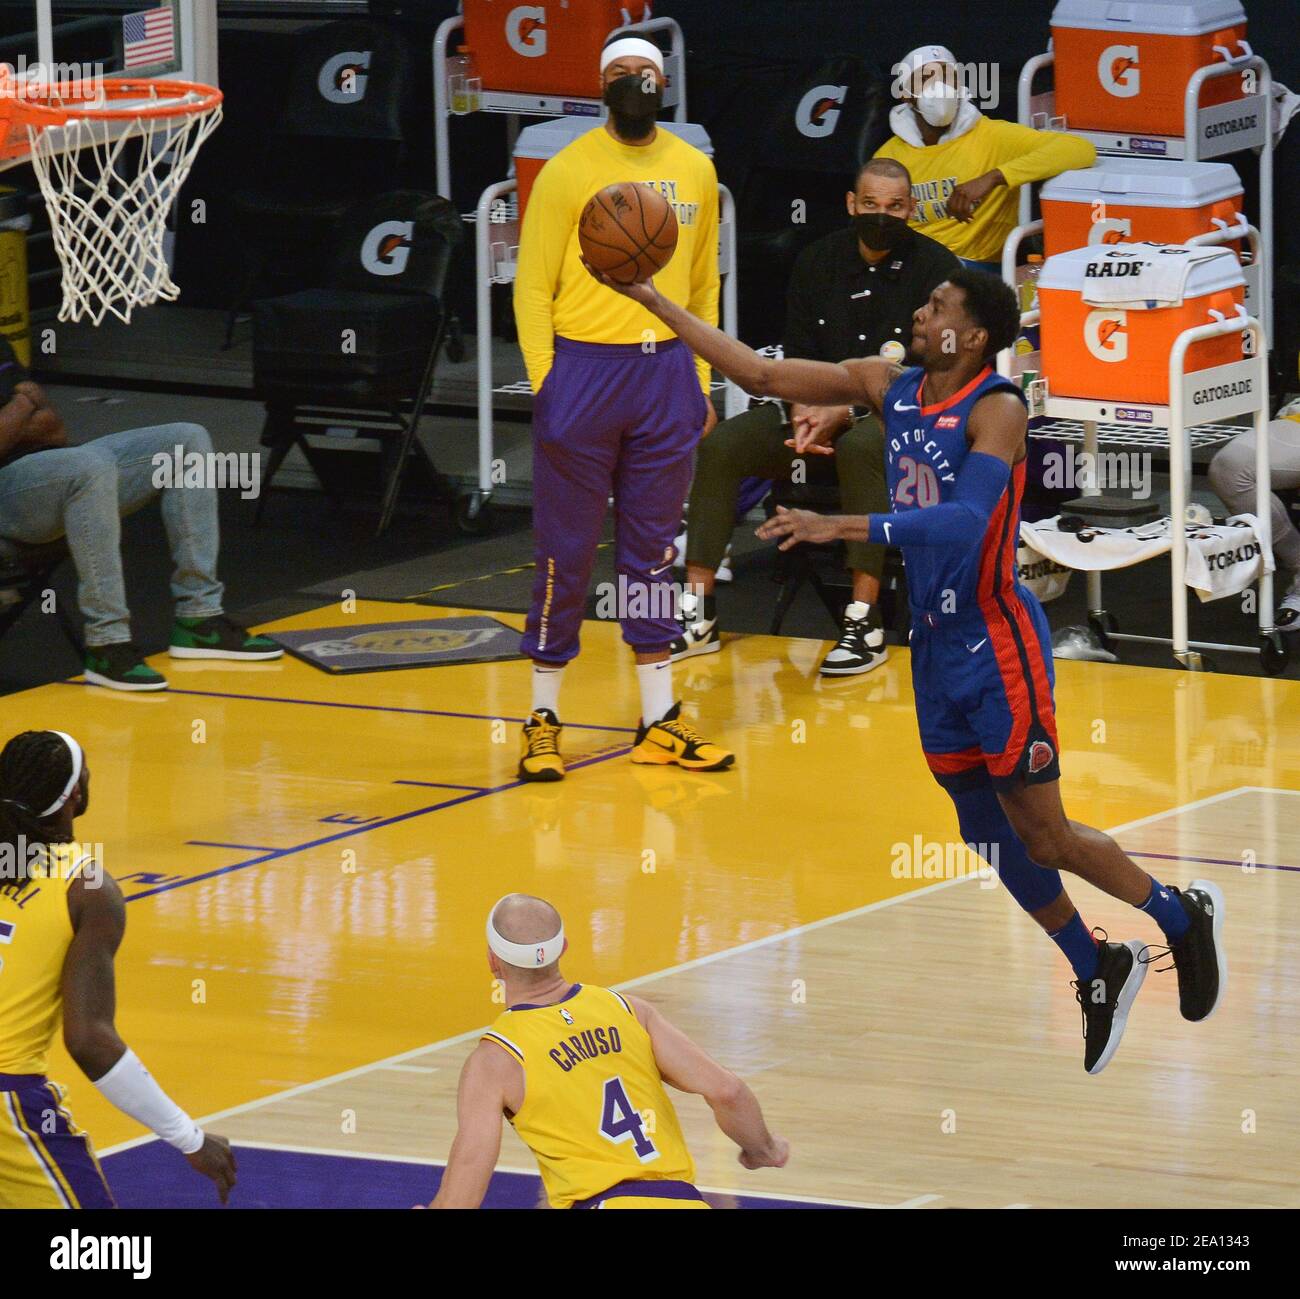 Los Angeles, United States. 6th Feb, 2021. Detroit Pistons' guard Josh Jackson scores n a layup against the Los Angeles Lakers during the third quarter at Staples Center in Los Angeles on Saturday, February 6, 2021. The Lakers defeated the Pistons 135-129 in double-overtime. Photo by Jim Ruymen/UPI Credit: UPI/Alamy Live News Stock Photo